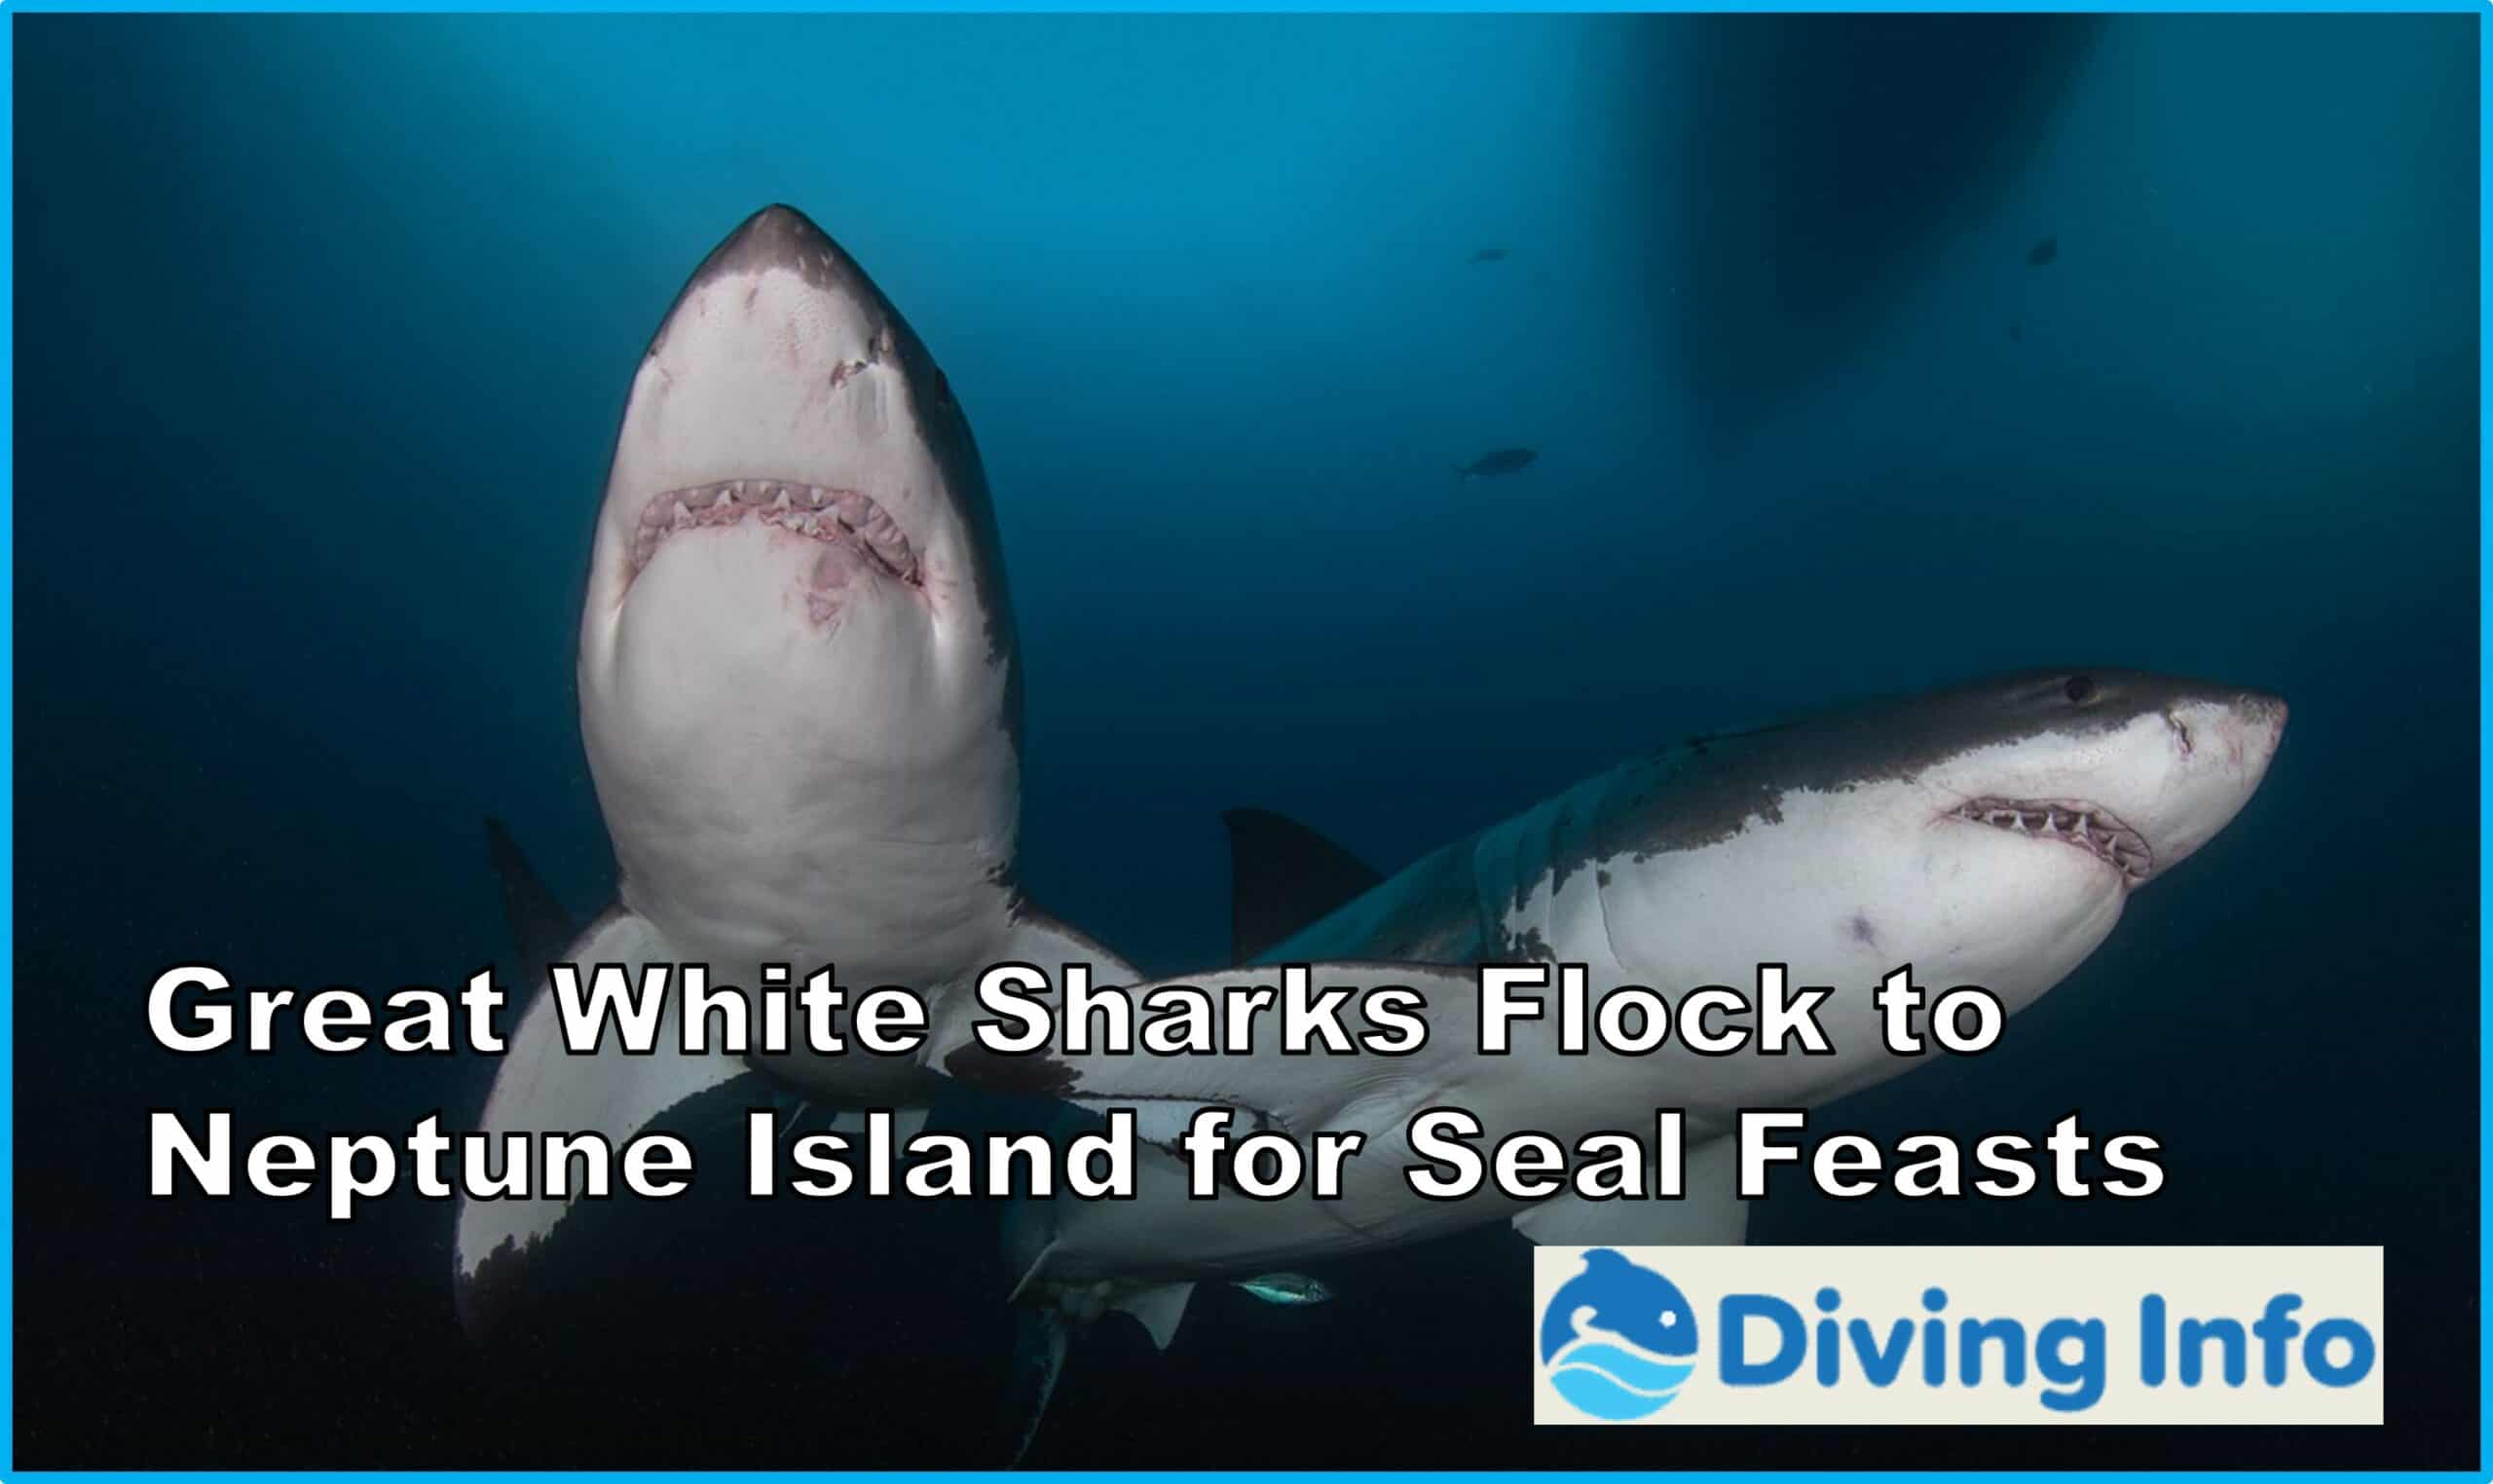 Great White Sharks Flock to Neptune Island for Seal Feasts